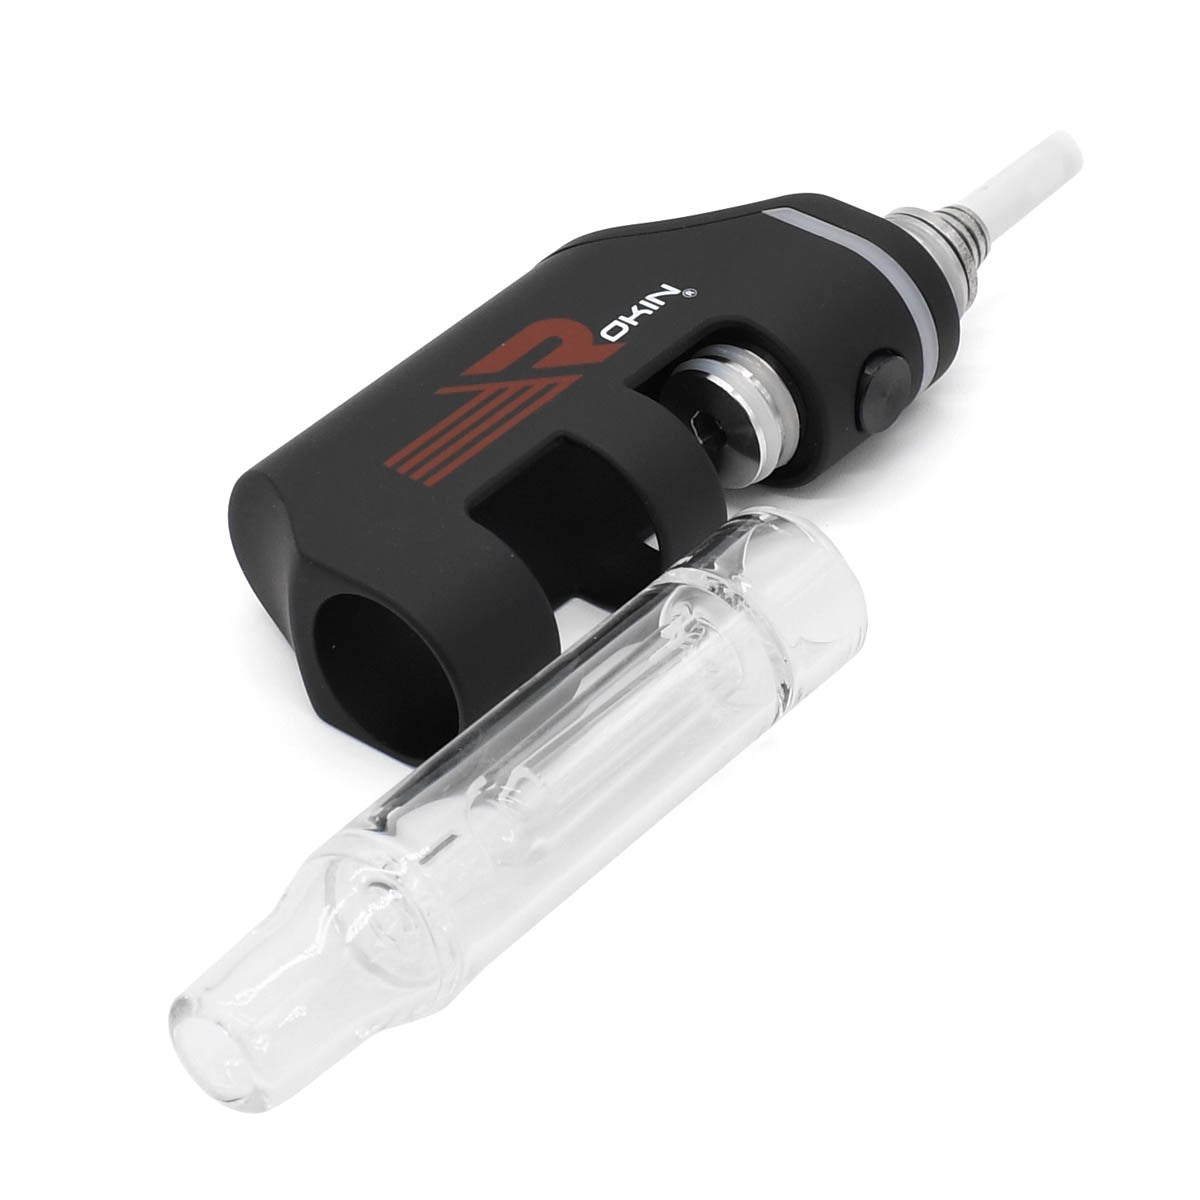 Stinger Electronic Dab Straw Glass water-filtration chamber